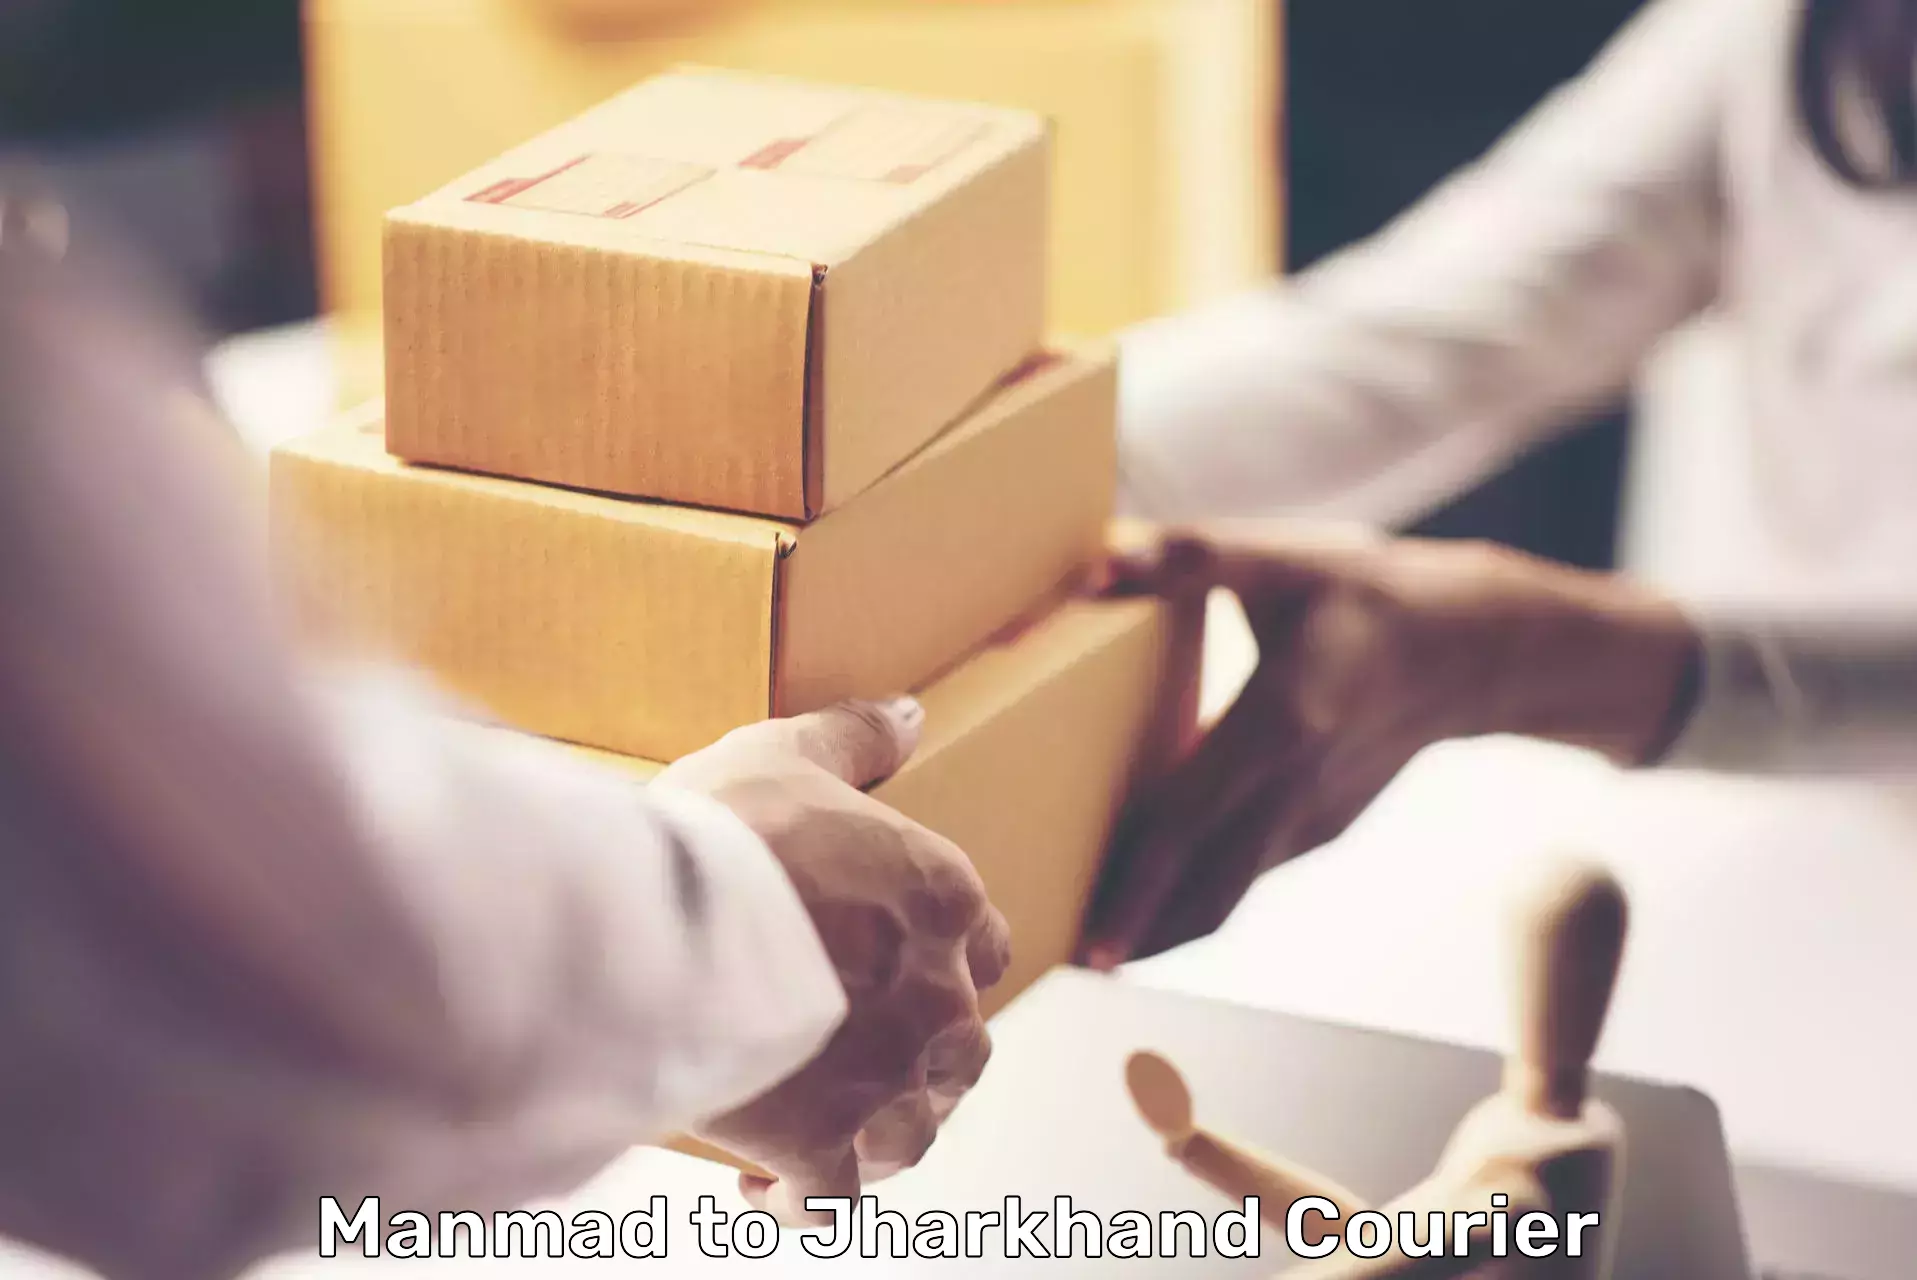 Seamless shipping experience in Manmad to Nirsa